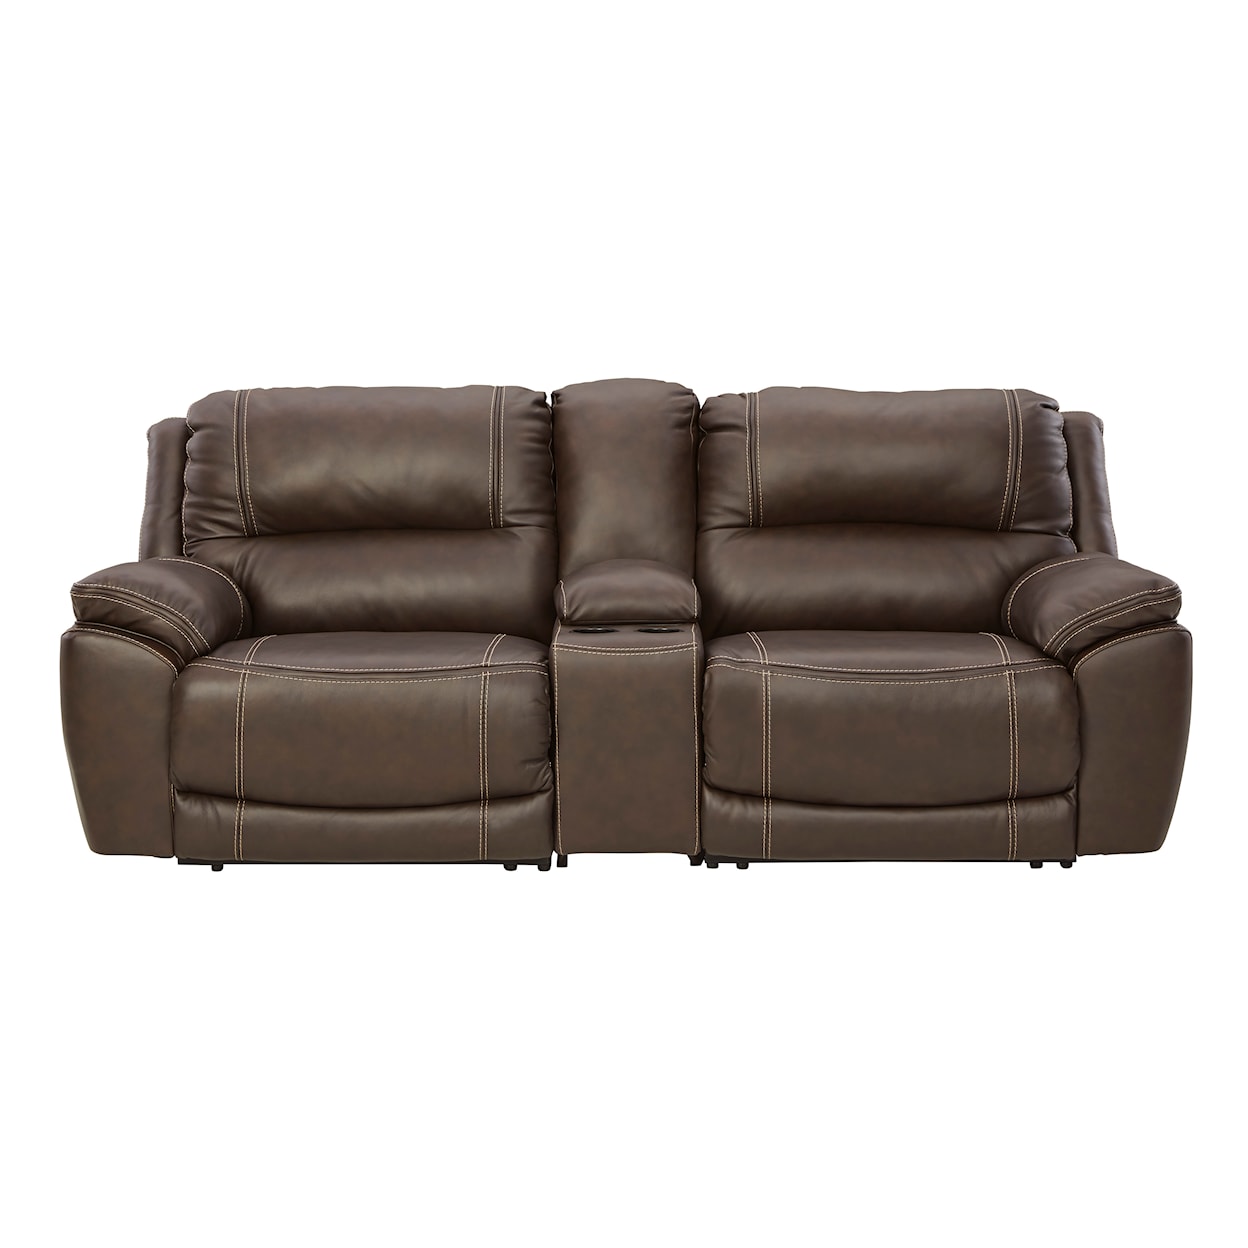 Signature Design by Ashley Dunleith Power Reclining Sectional Loveseat